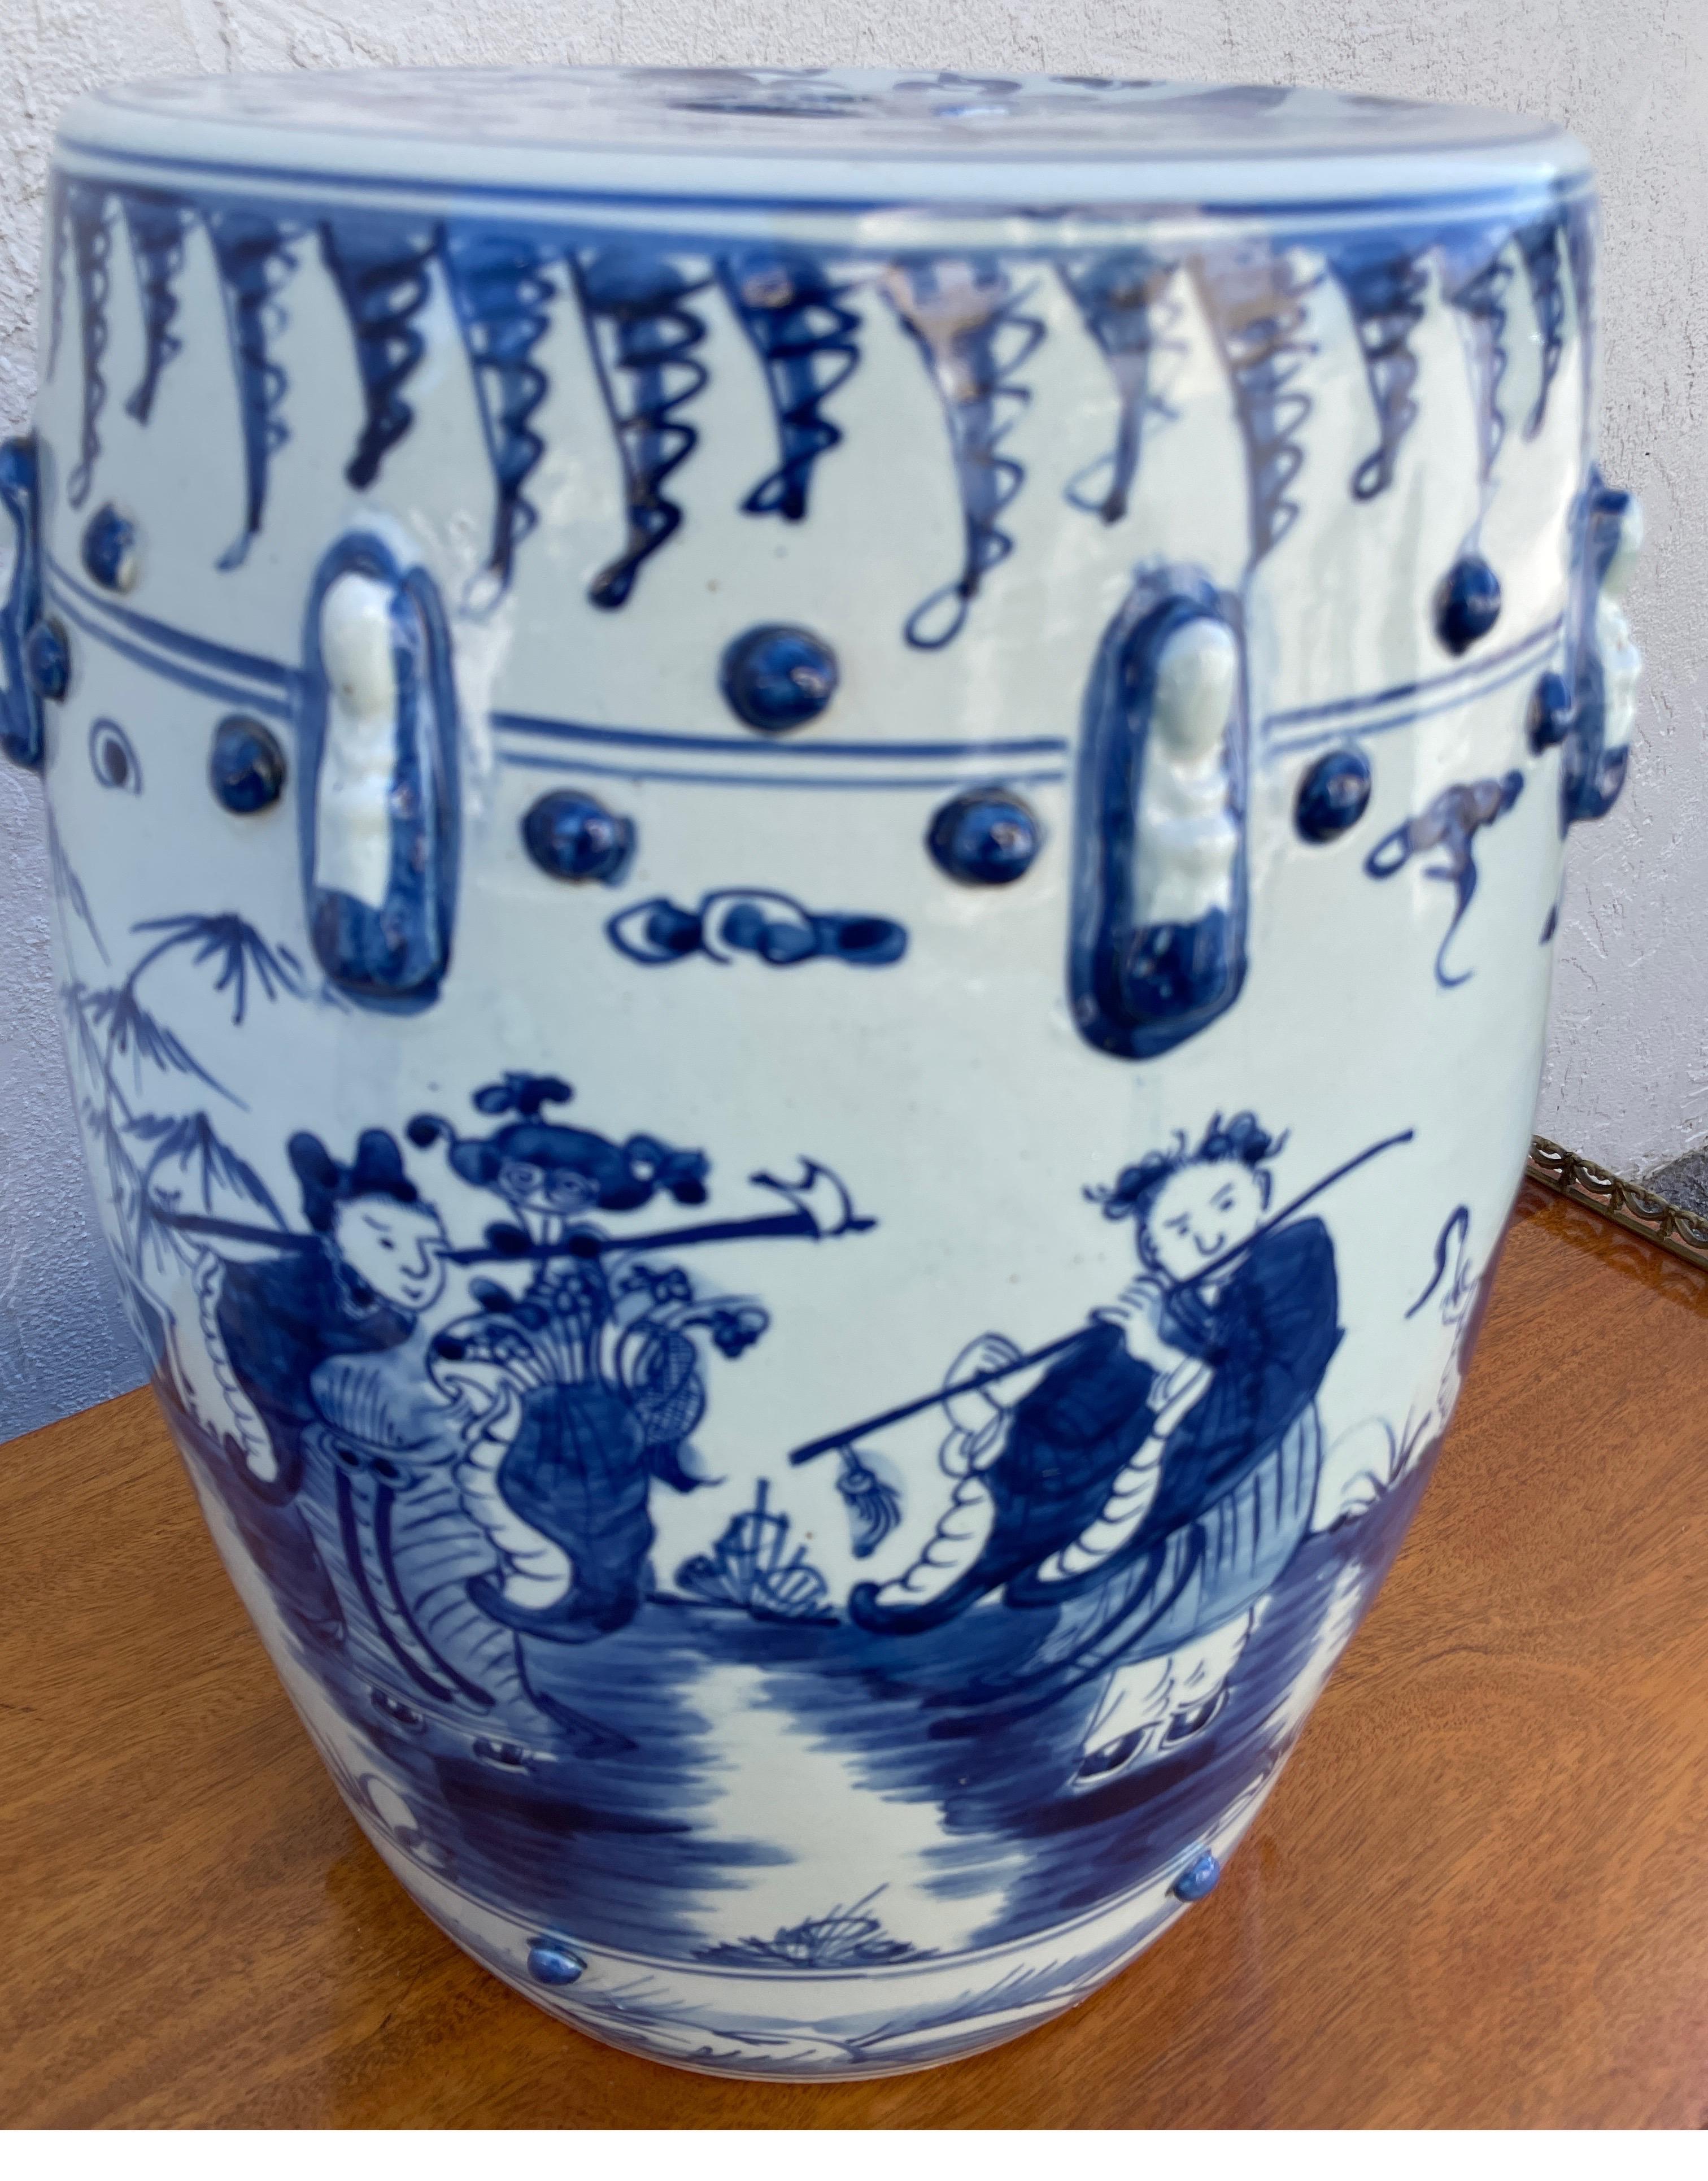 Striking blue and white garden seat. Very Chinoiserie in design with great attention to detail.